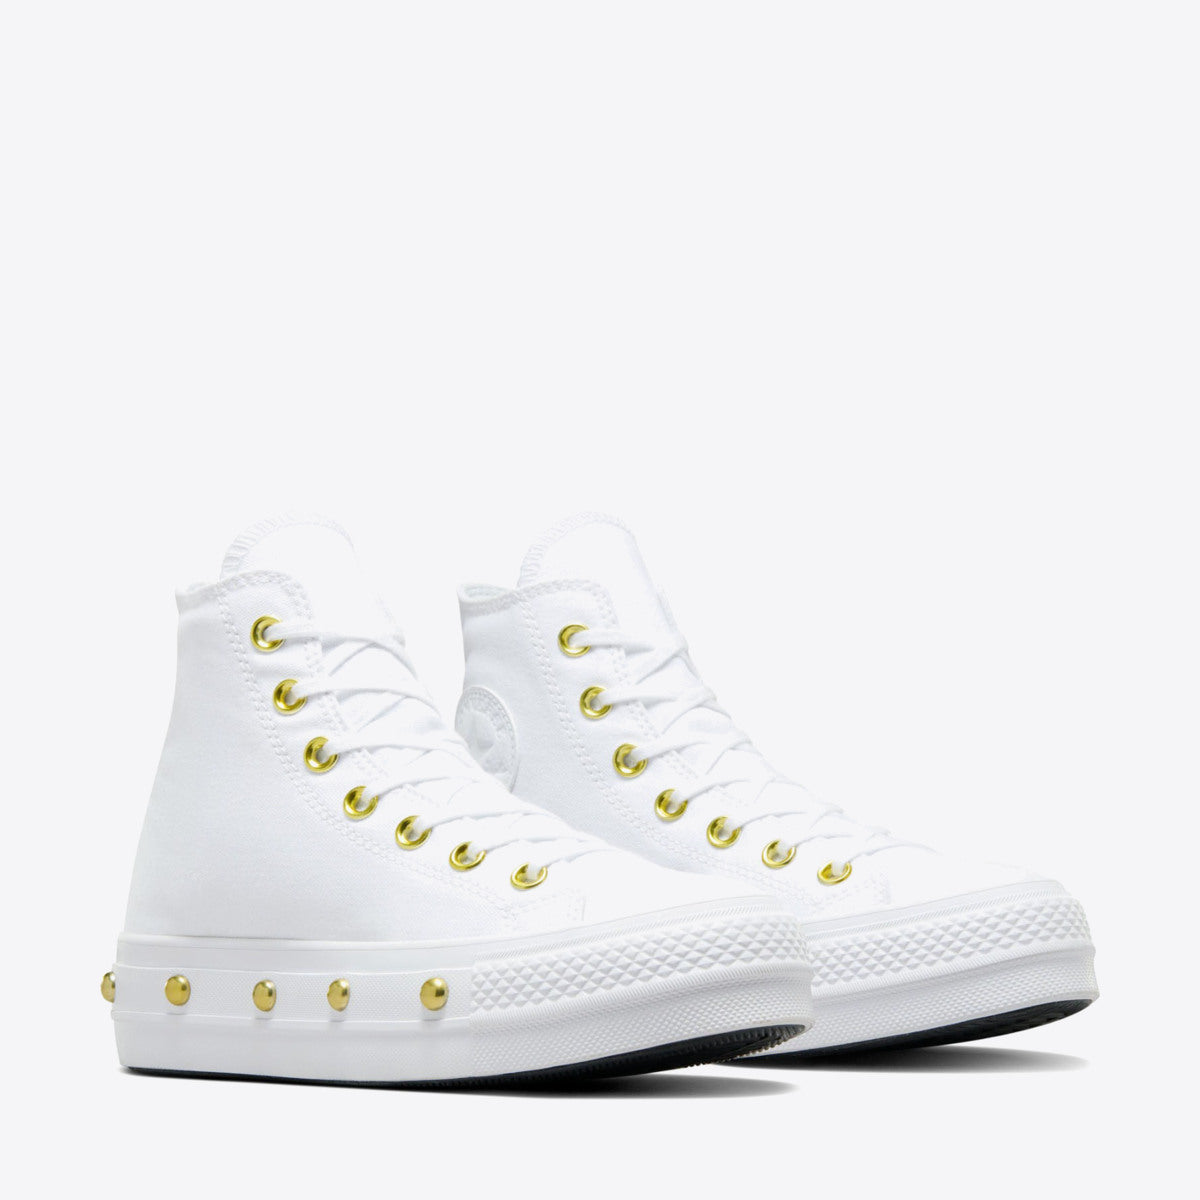 CONVERSE CT Lift Star Studded High White/White/Gold - Image 5